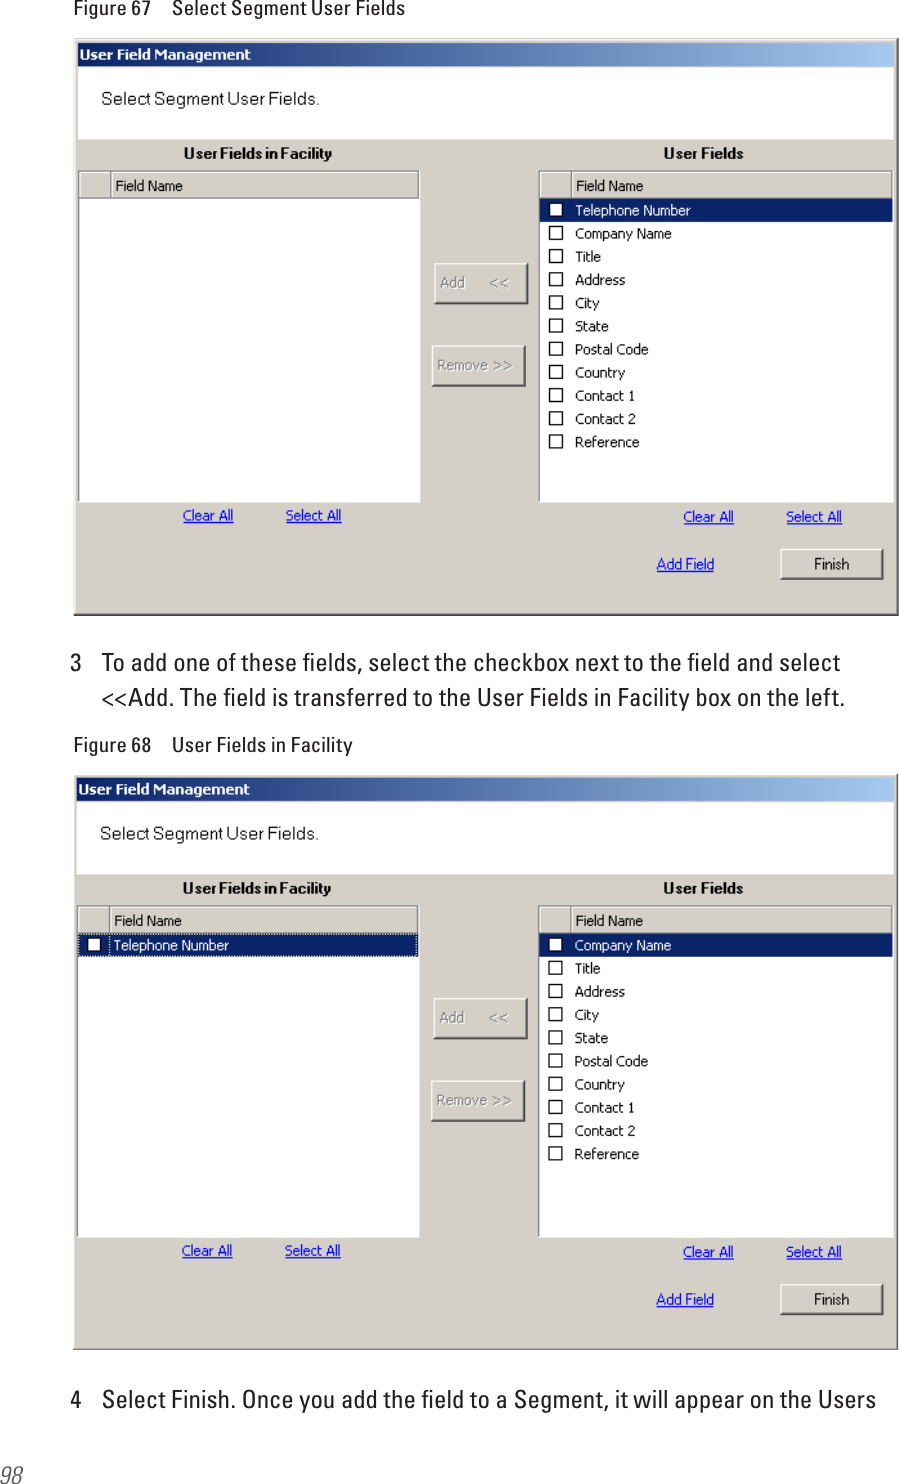 98Figure 67  Select Segment User Fields3  To add one of these ﬁelds, select the checkbox next to the ﬁeld and select &lt;&lt;Add. The ﬁeld is transferred to the User Fields in Facility box on the left.Figure 68  User Fields in Facility4  Select Finish. Once you add the ﬁeld to a Segment, it will appear on the Users 